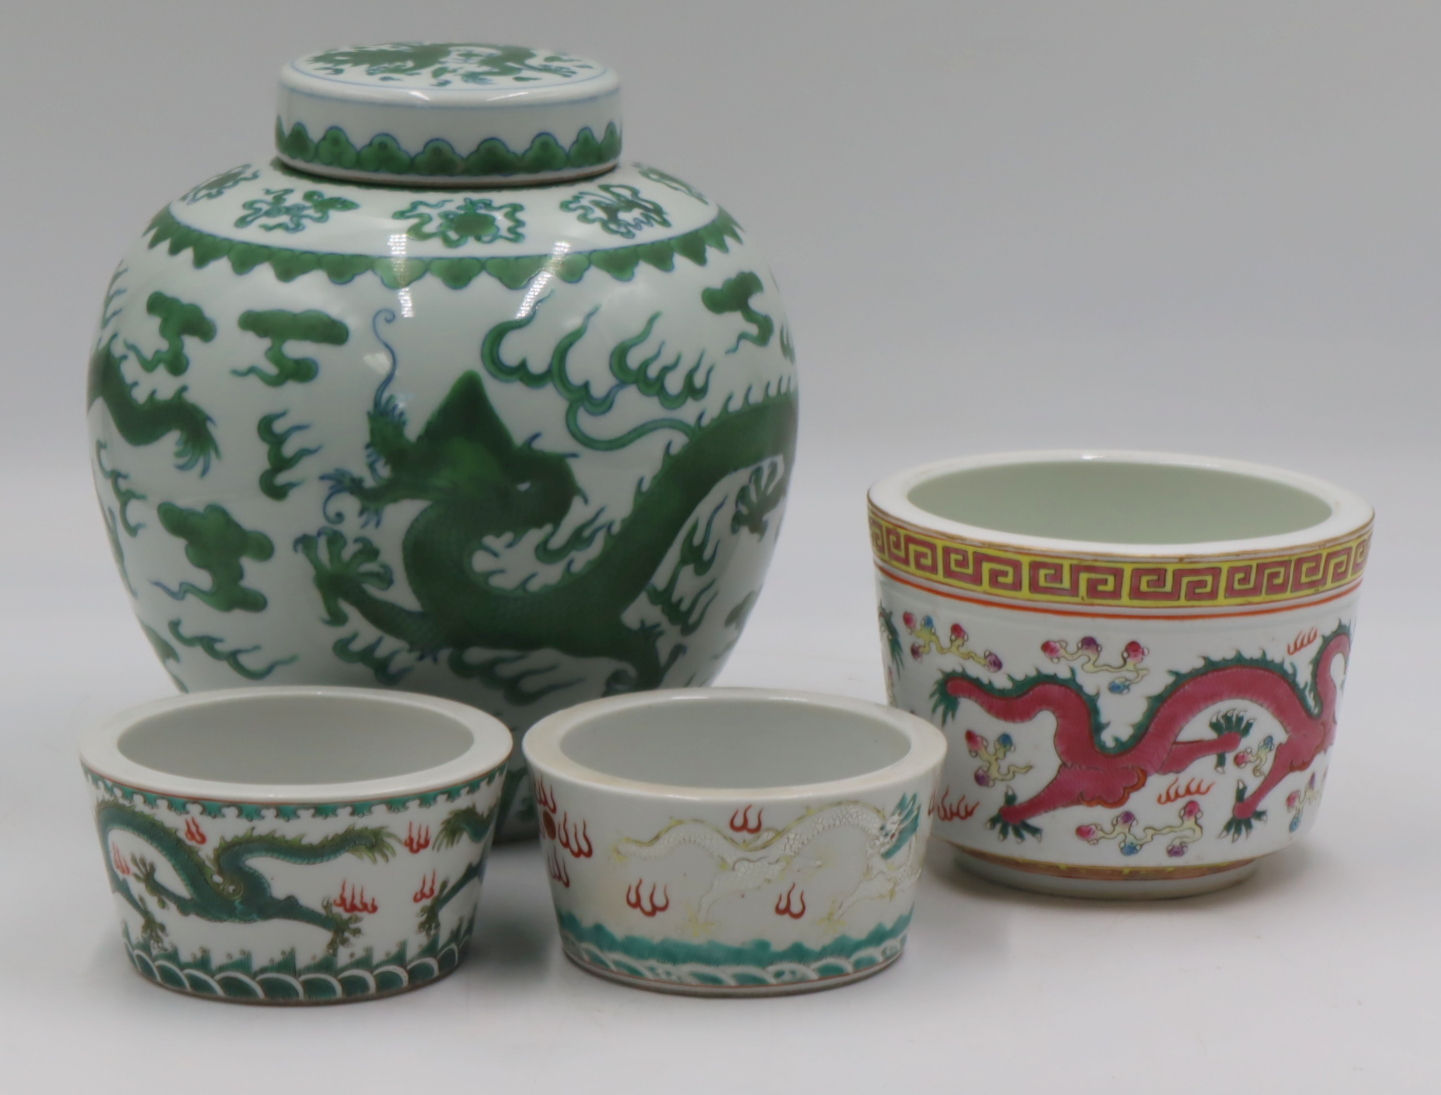 GROUPING OF CHINESE DRAGON PORCELAINS.